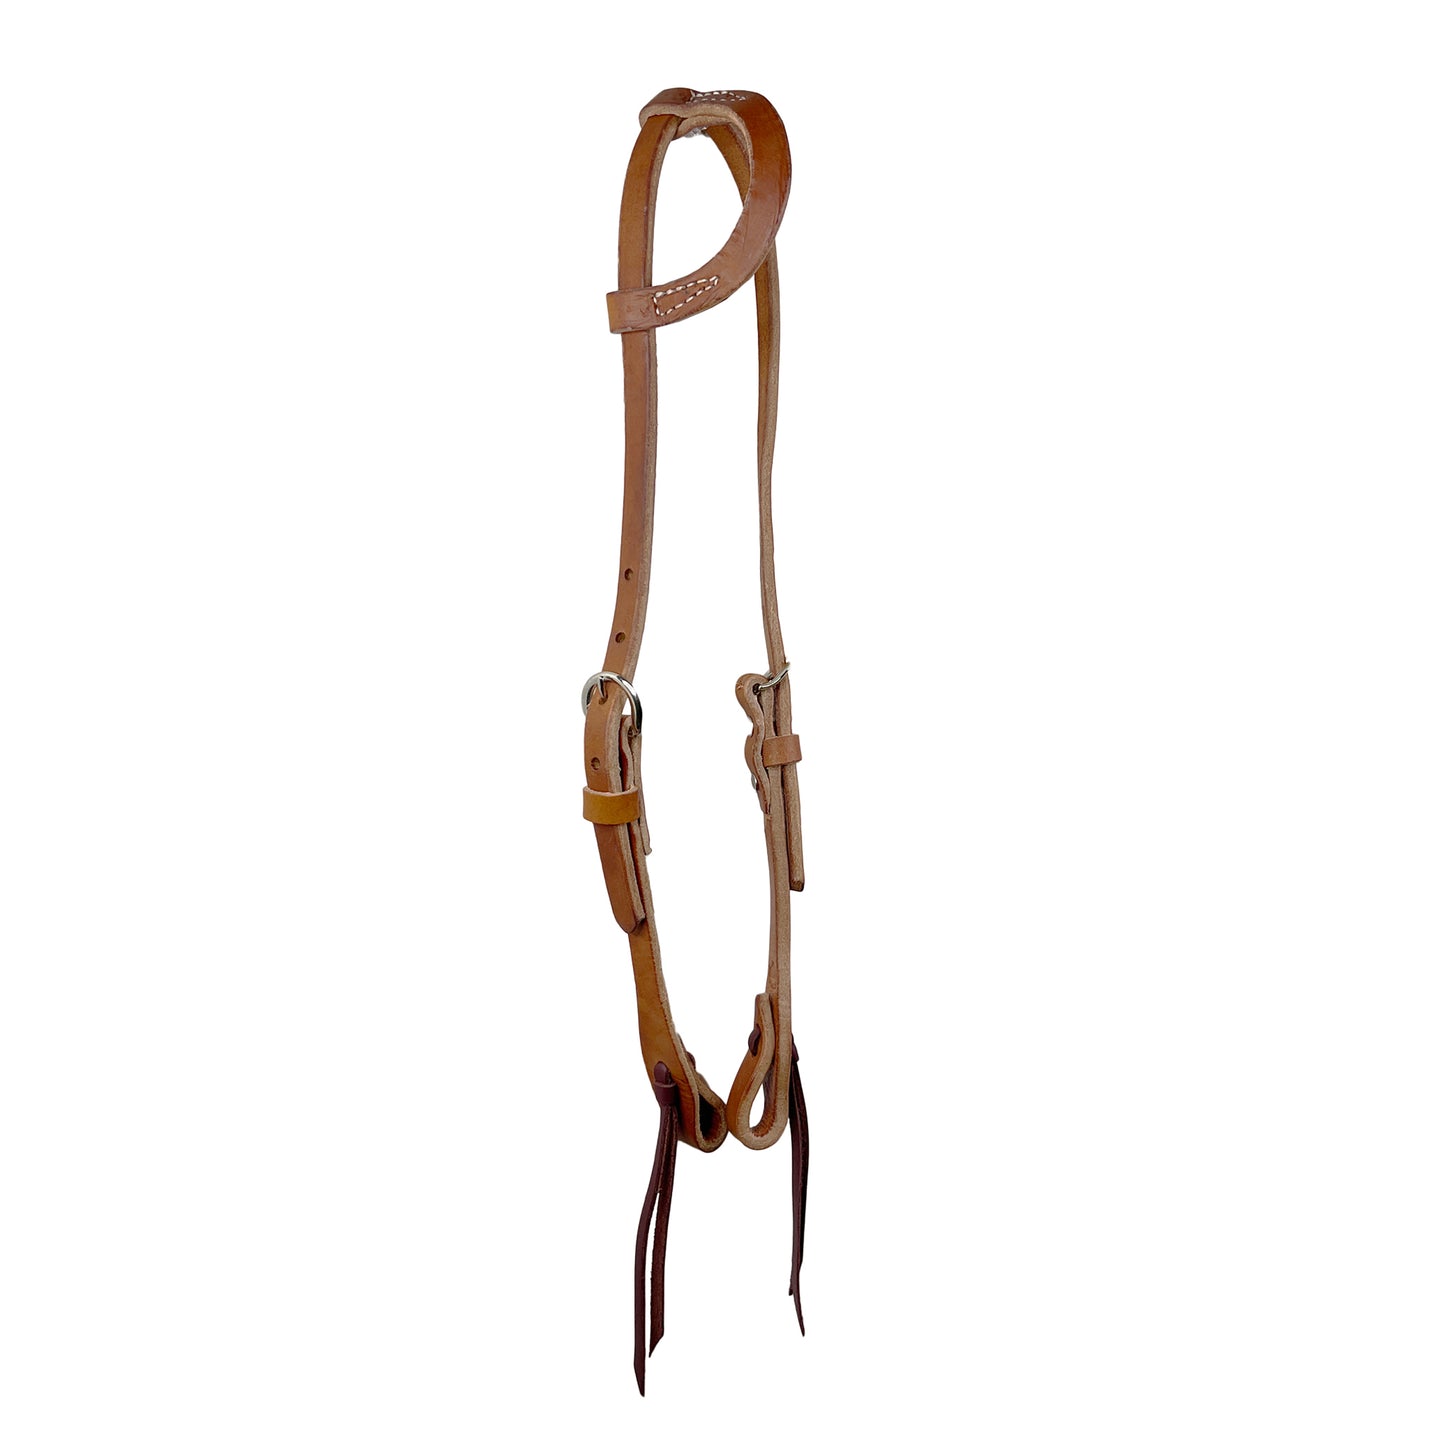 5/8" Flat one ear headstall harness leather.